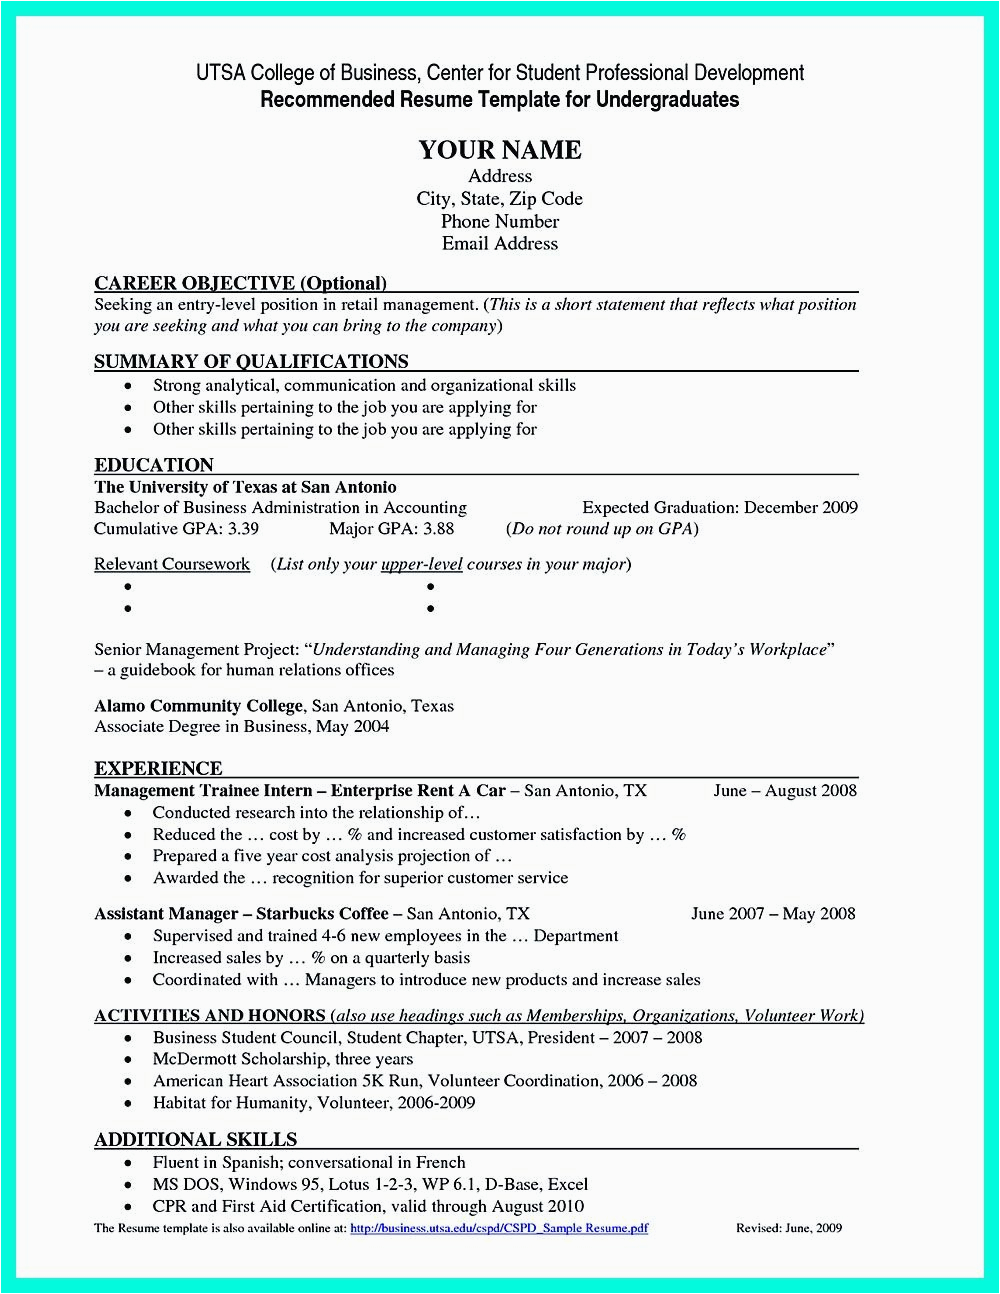 Sample Resume for Current College Student Current College Student Resume is Designed for Fresh